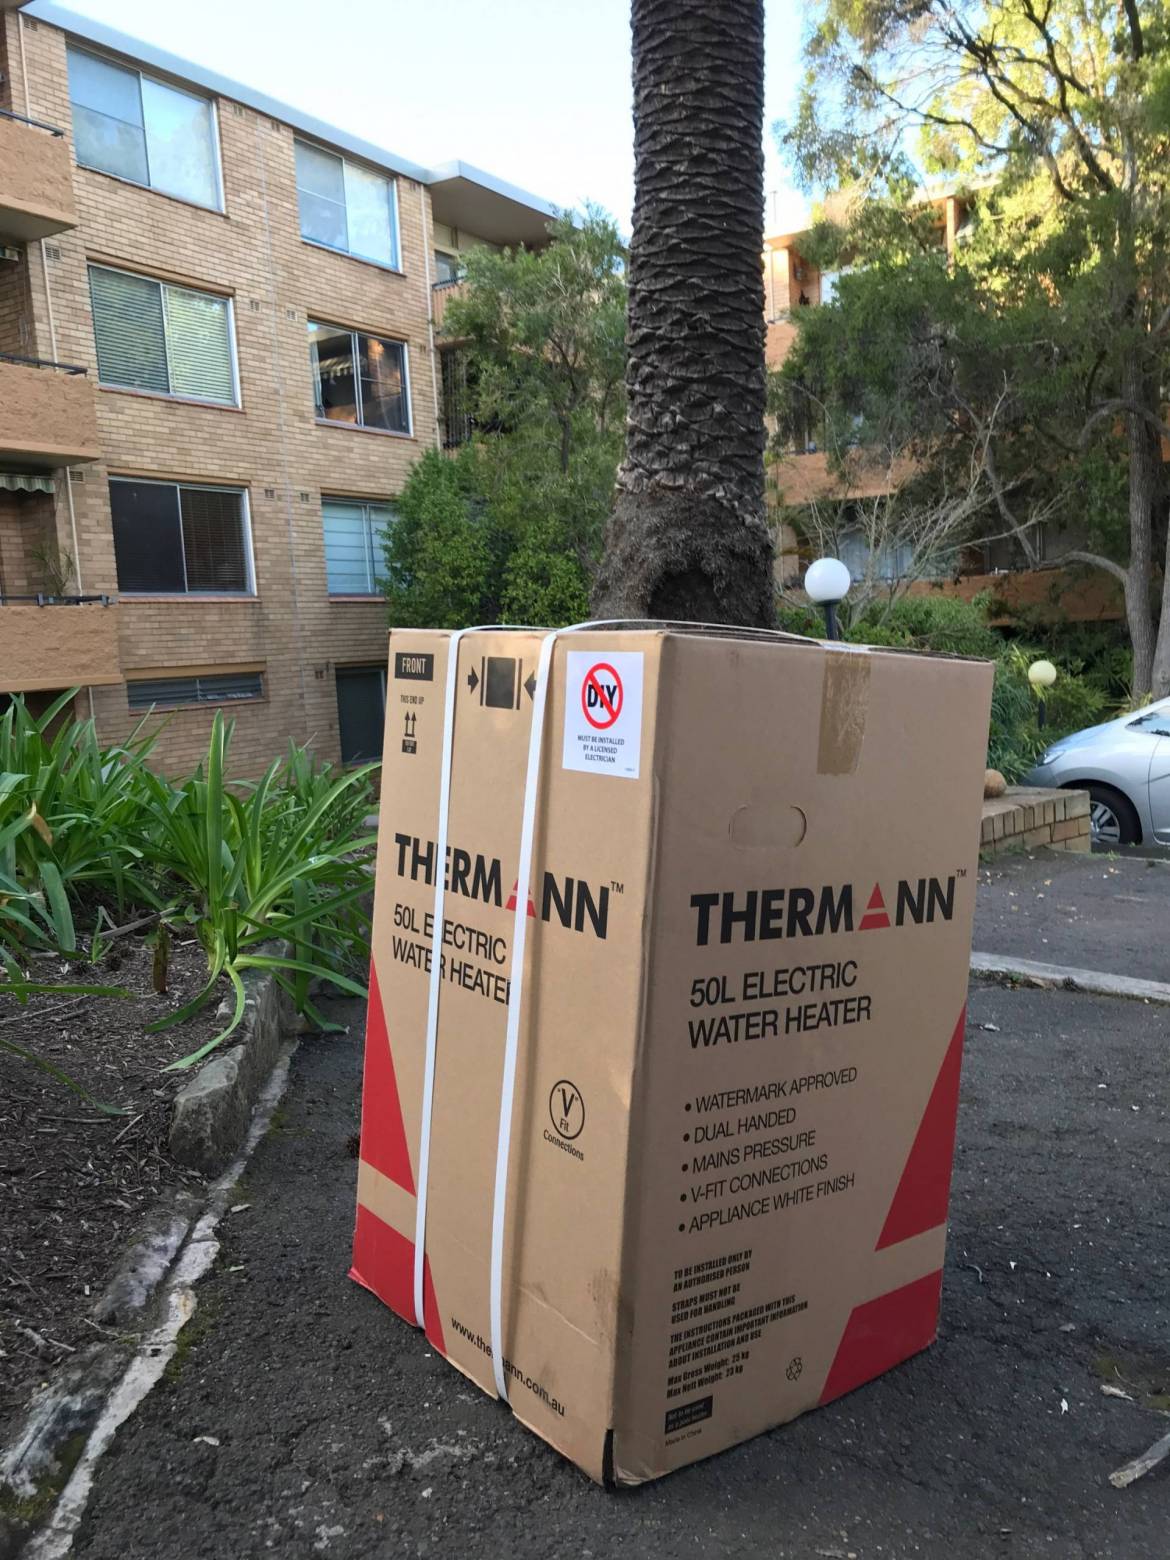 25.8.20-Lane-Cove-2066-Thermann-50ltr-electric-hot-water-system-in-box-scaled.jpg